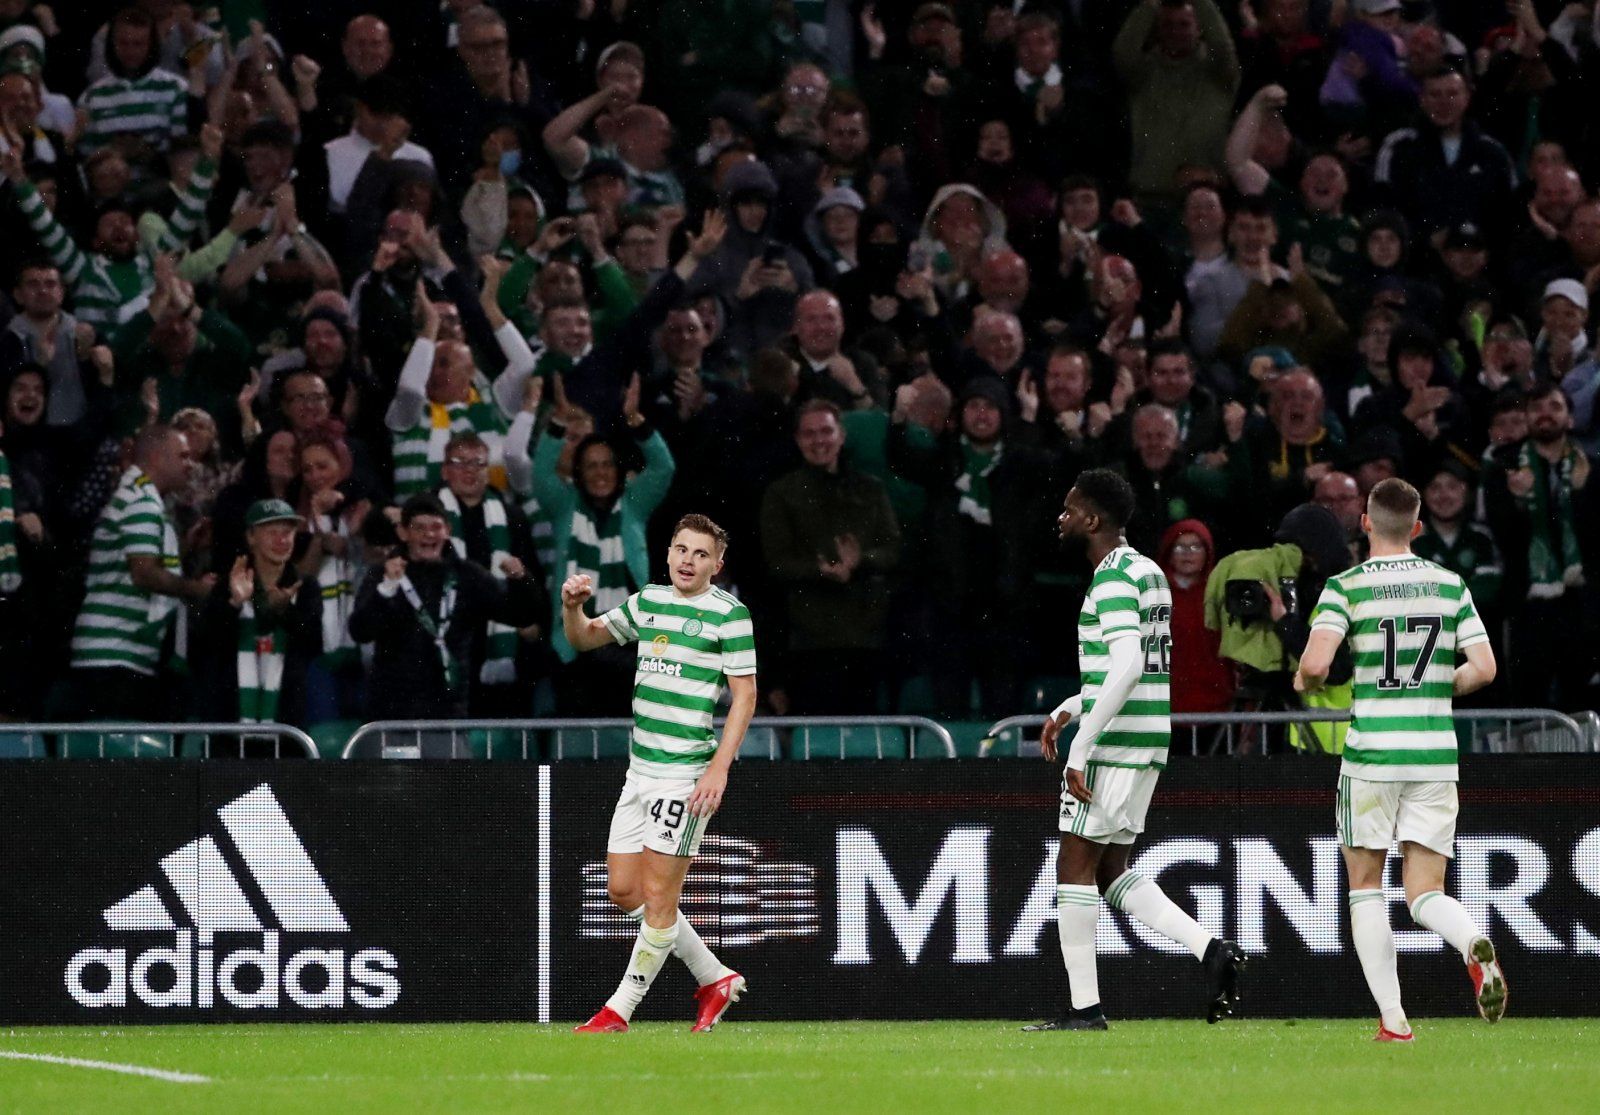 Celtic: James Forrest possibly frustrated by lack of game time at Parkhead -Celtic News